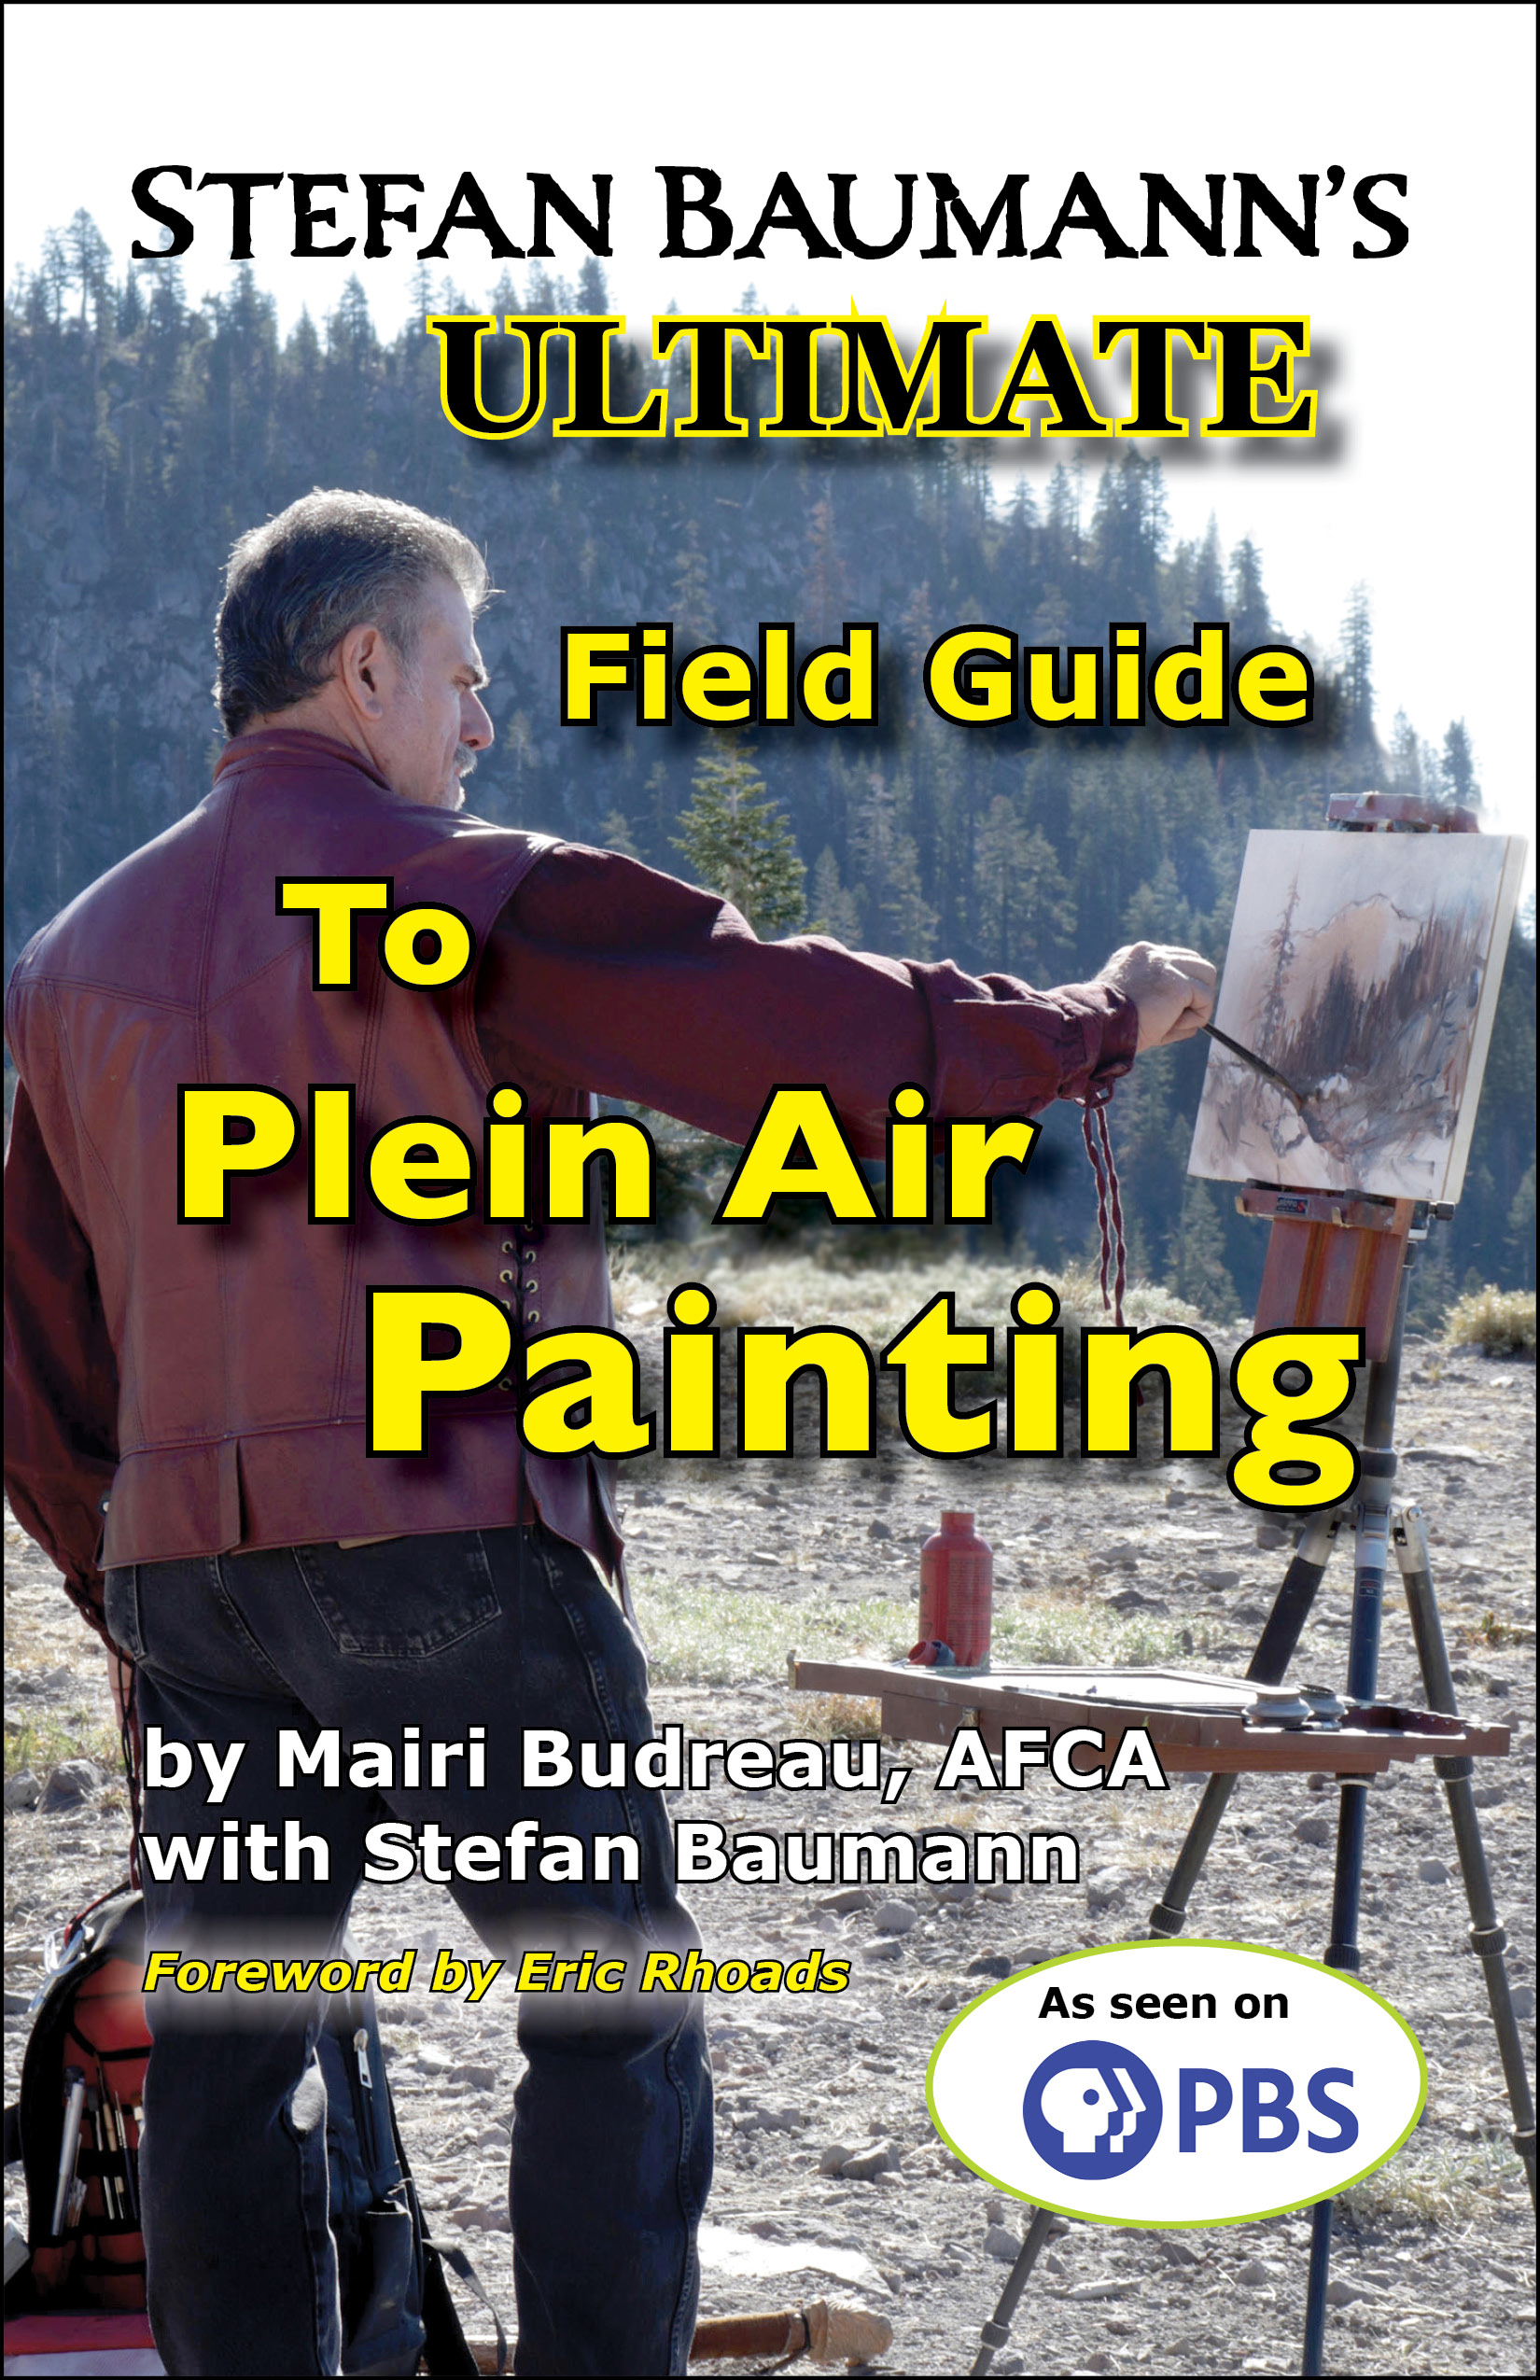 Click this image to order Stefan Baumann's Ultimate Field Guide to Plein Air Painting